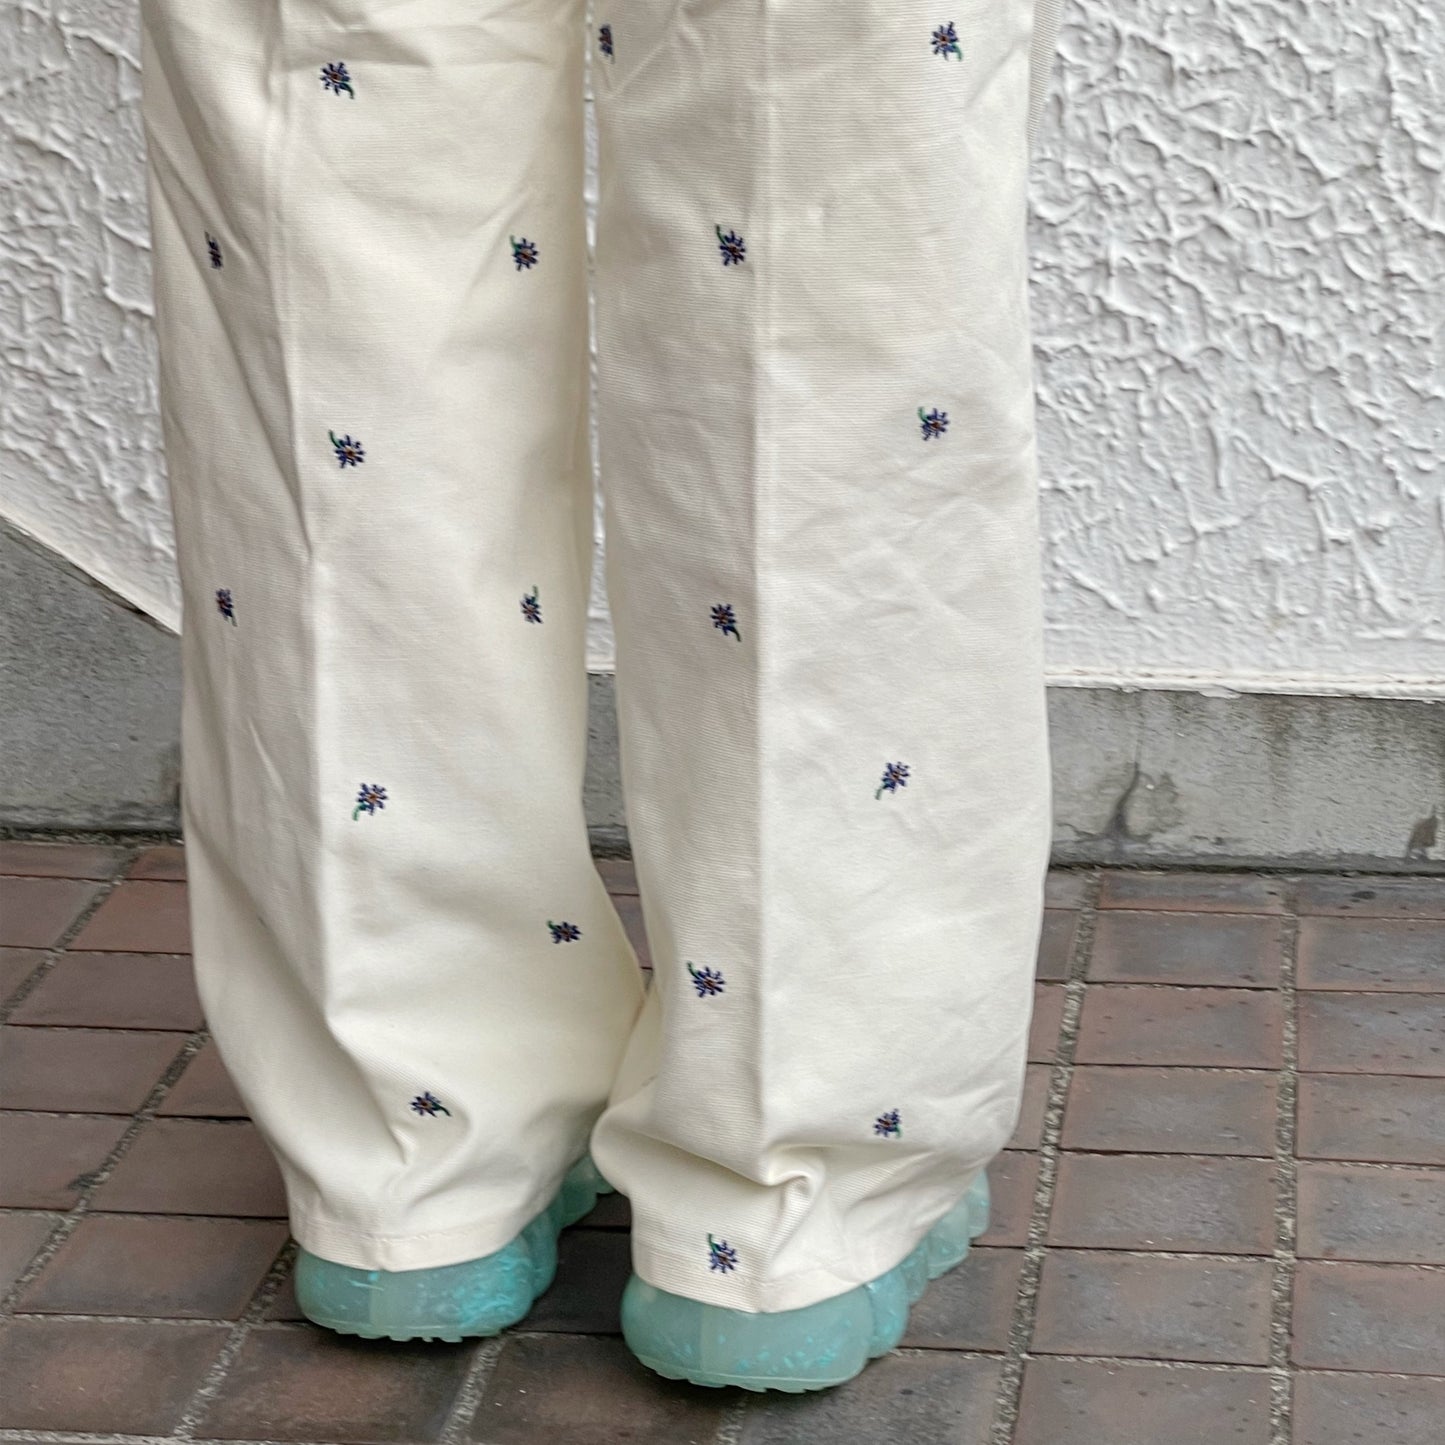 FLOWER EMBROIDERY TUCK PANTS feat.UNIVERSALOVERALL / IVORY / フラワー刺繍タックパンツ